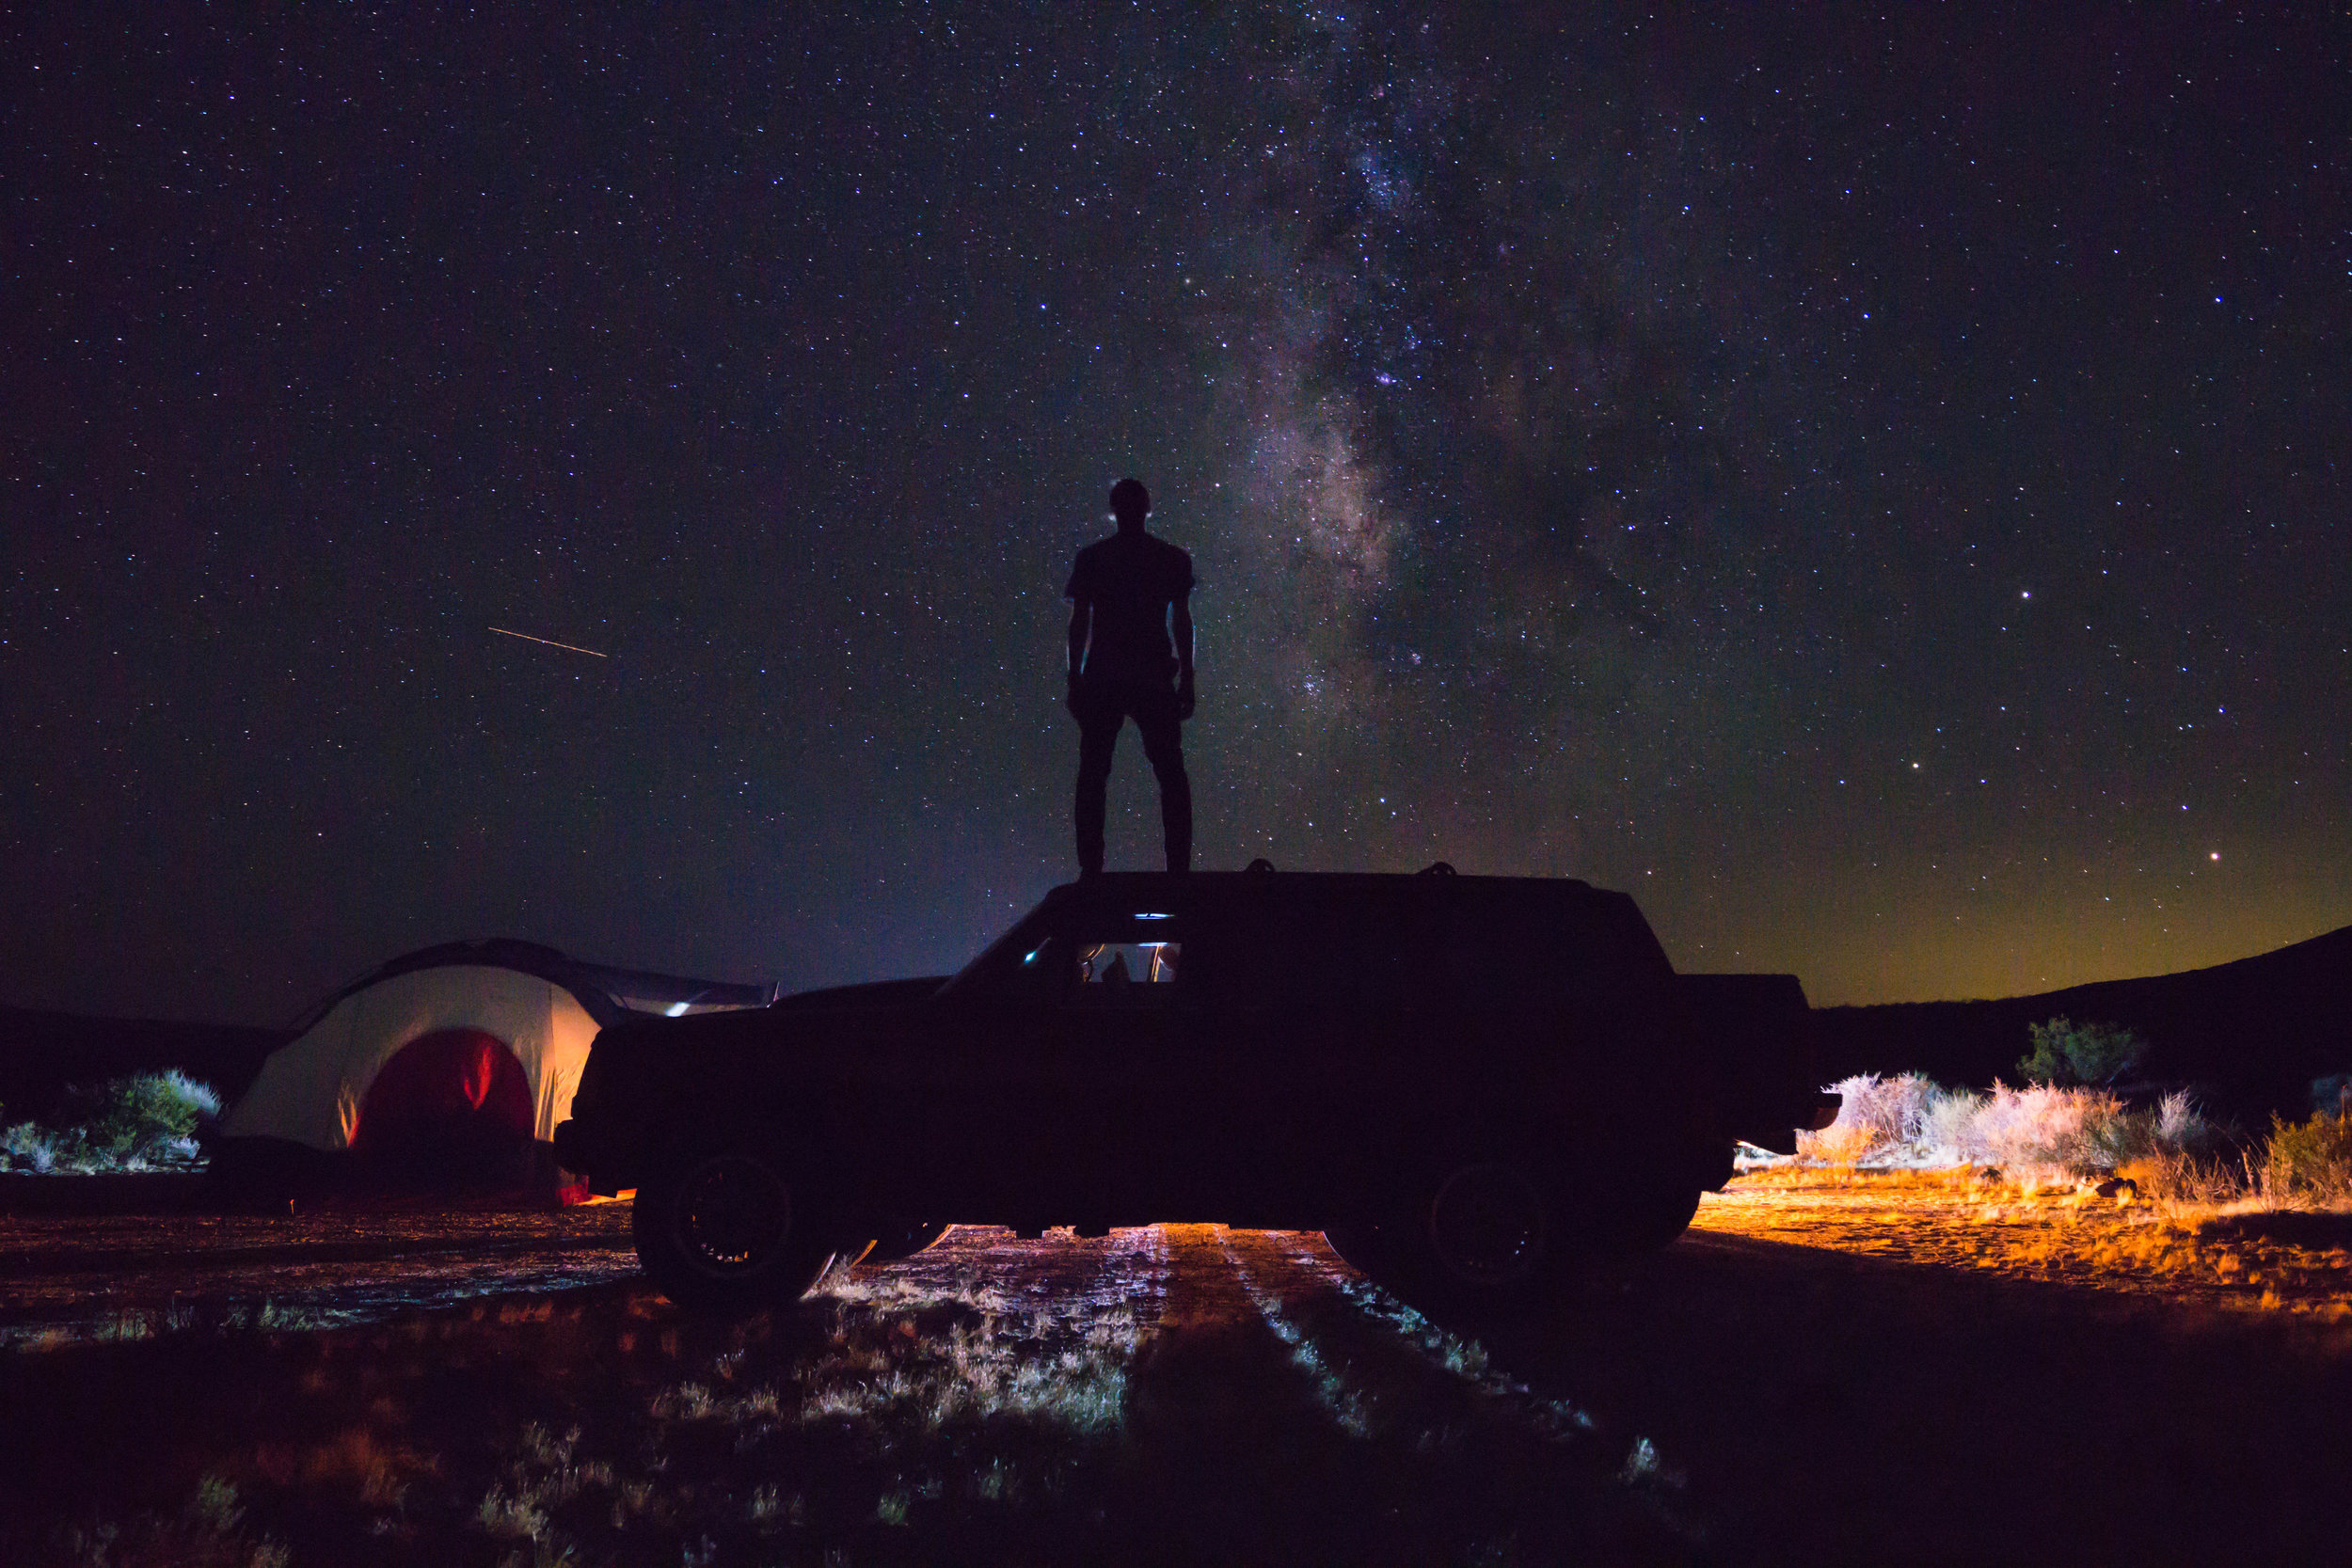 Spaced out. After 5+ hours of driving we arrive in the Mojave Desert, engulfed by the stars.